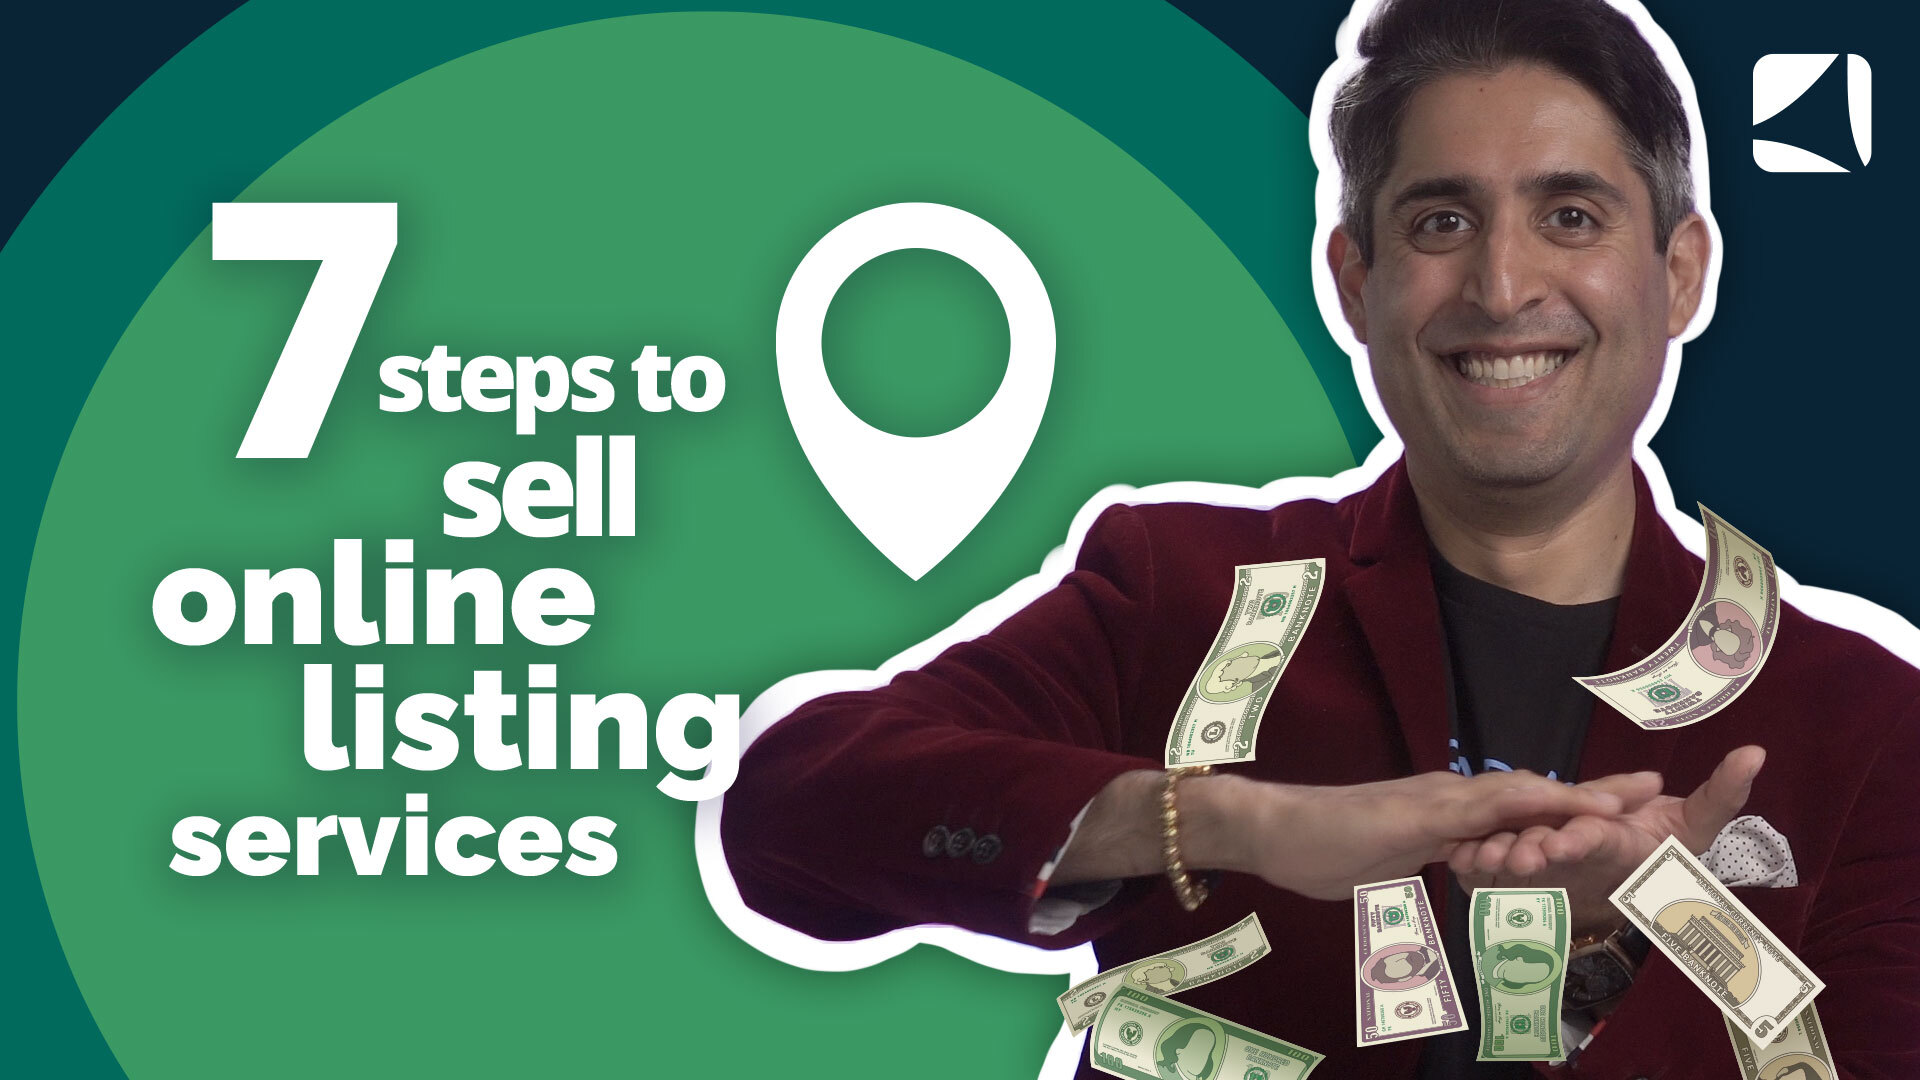 7-steps-to-sell-online-listing-services-YouTube-Thumbnail